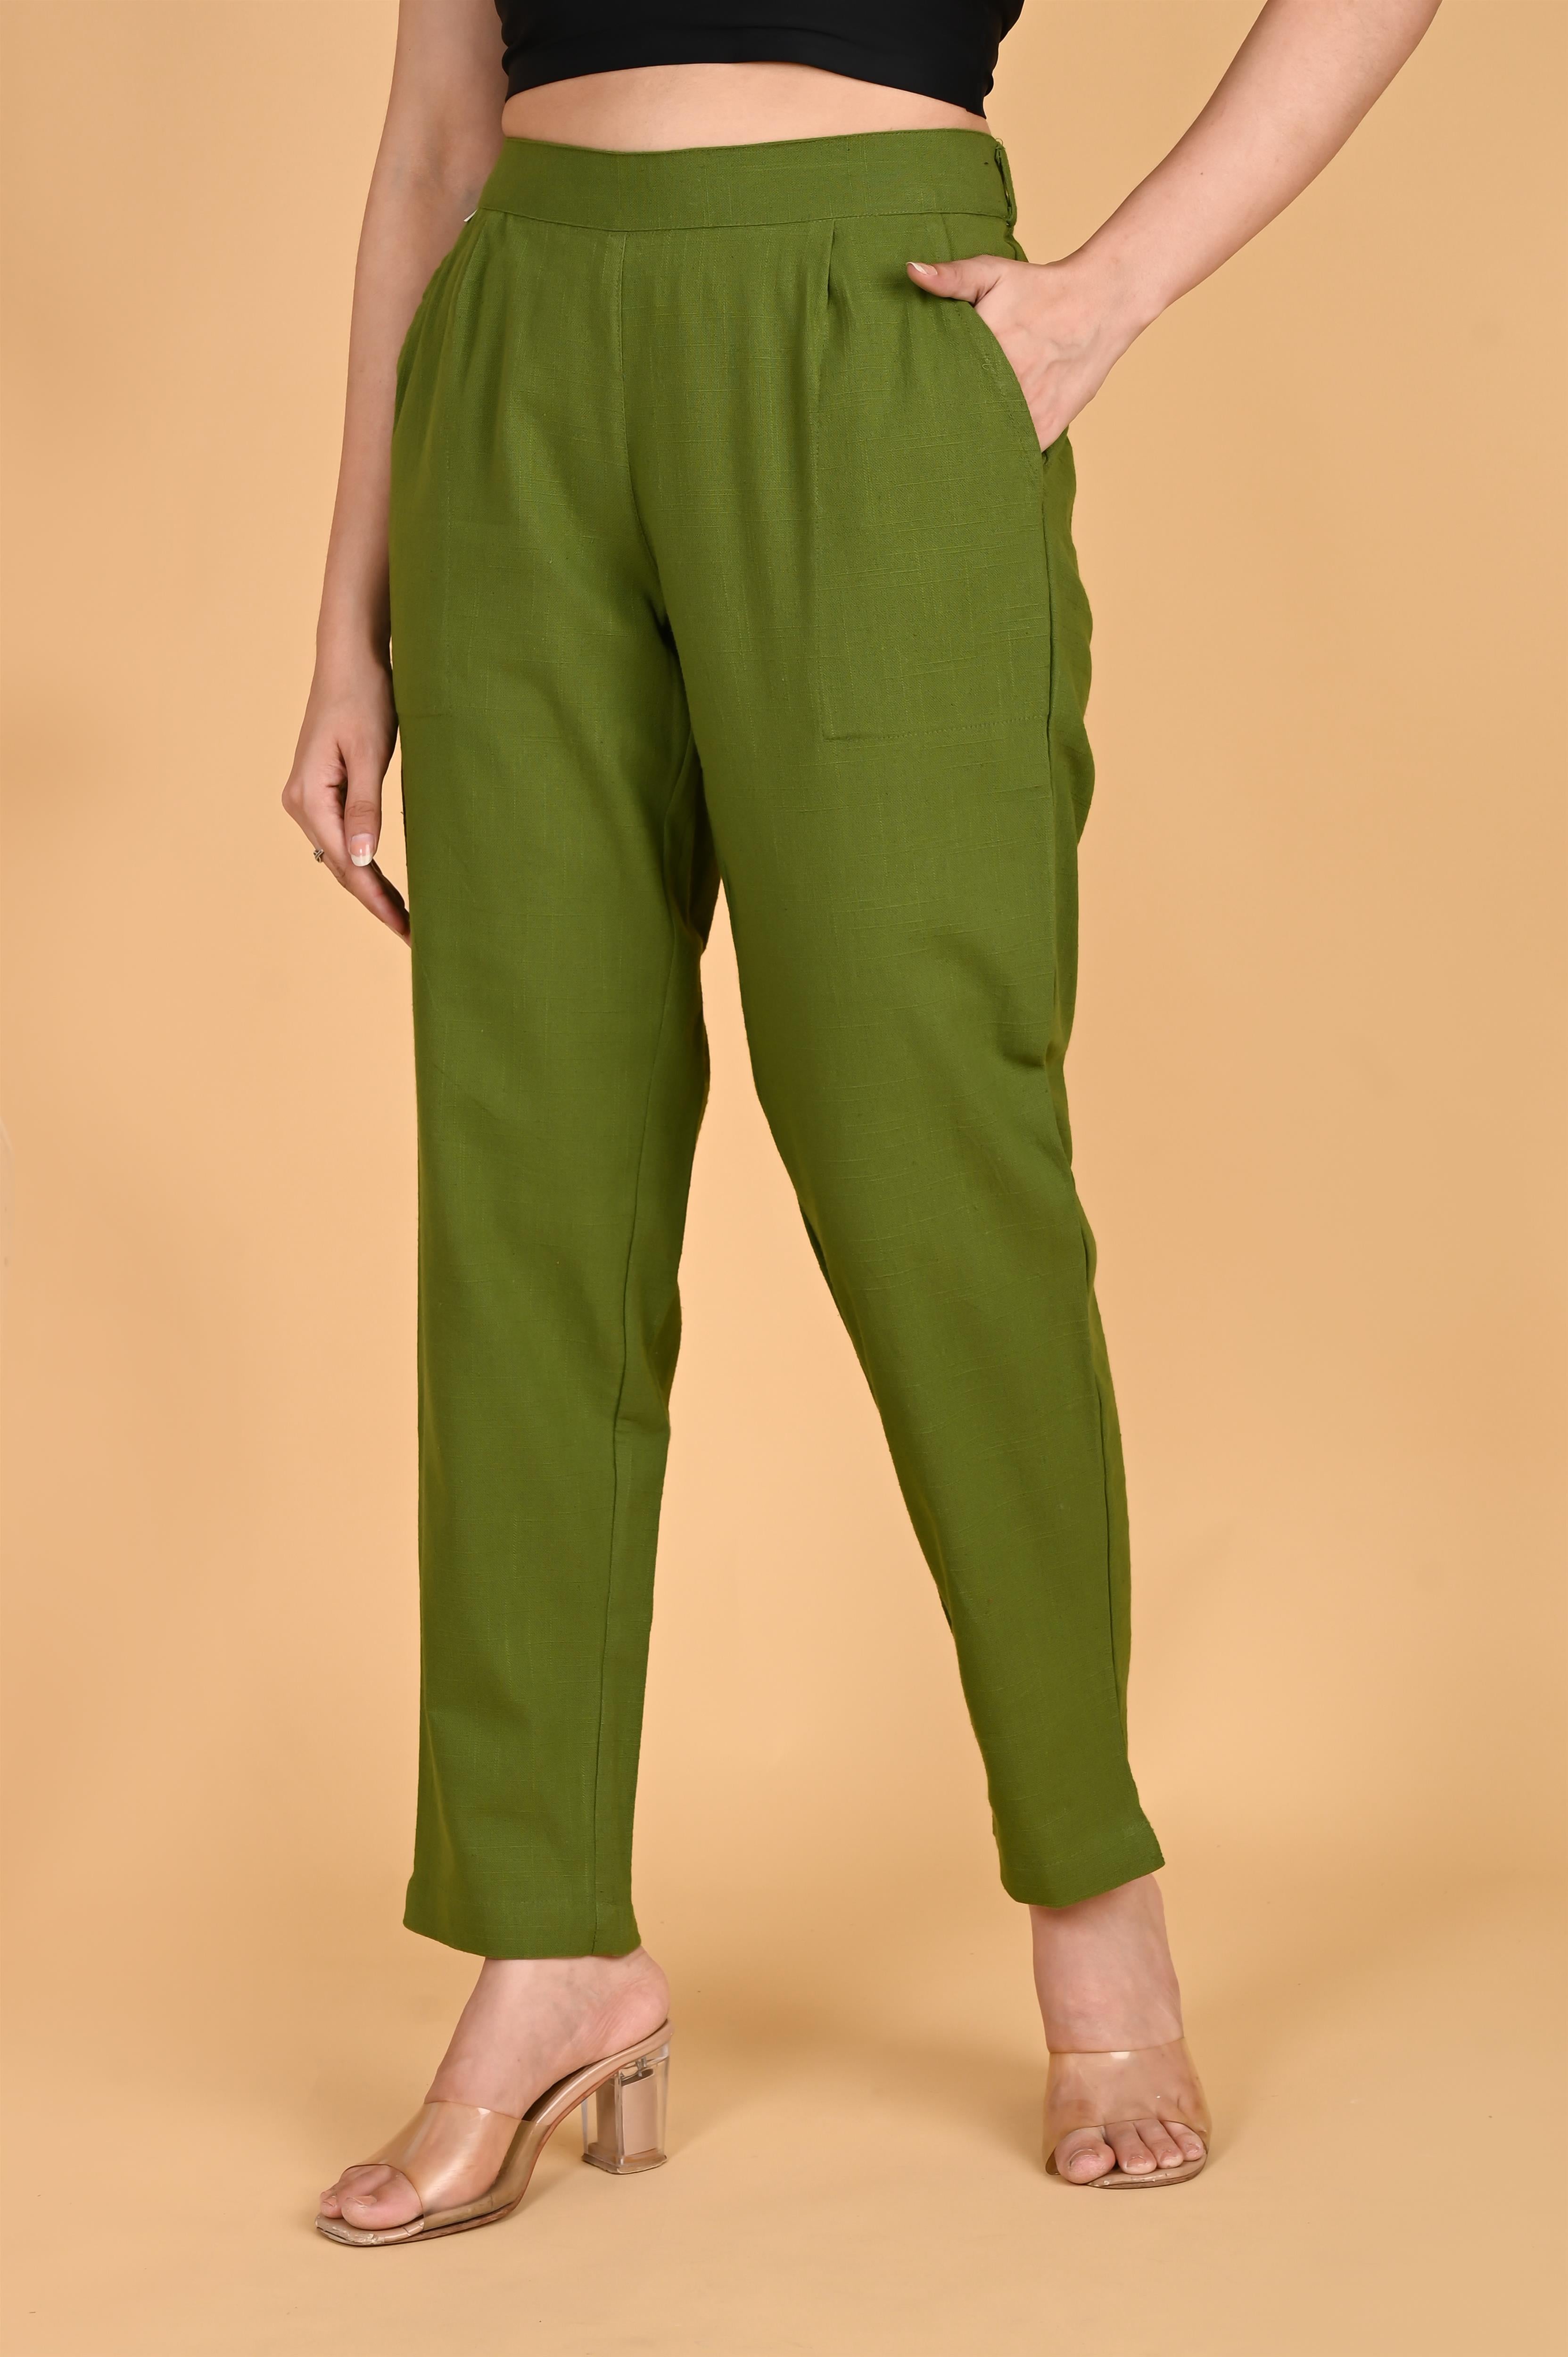 OLIVE GREEN CLASSIC COTTON PANTS - SKYTICK